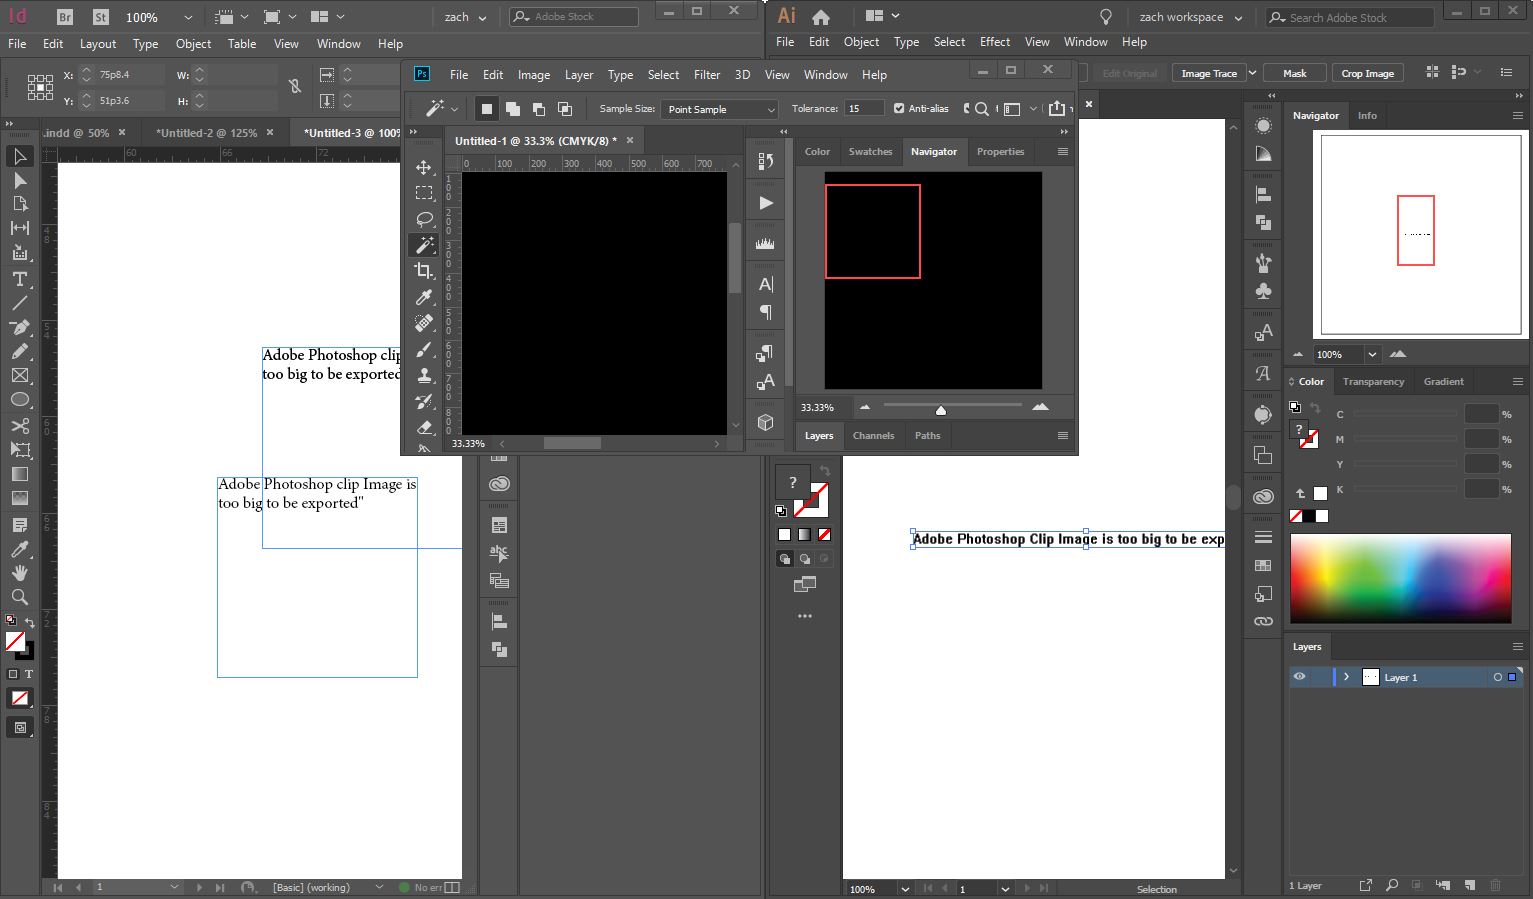 Adobe Photoshop clip Image is too big to be exported.JPG